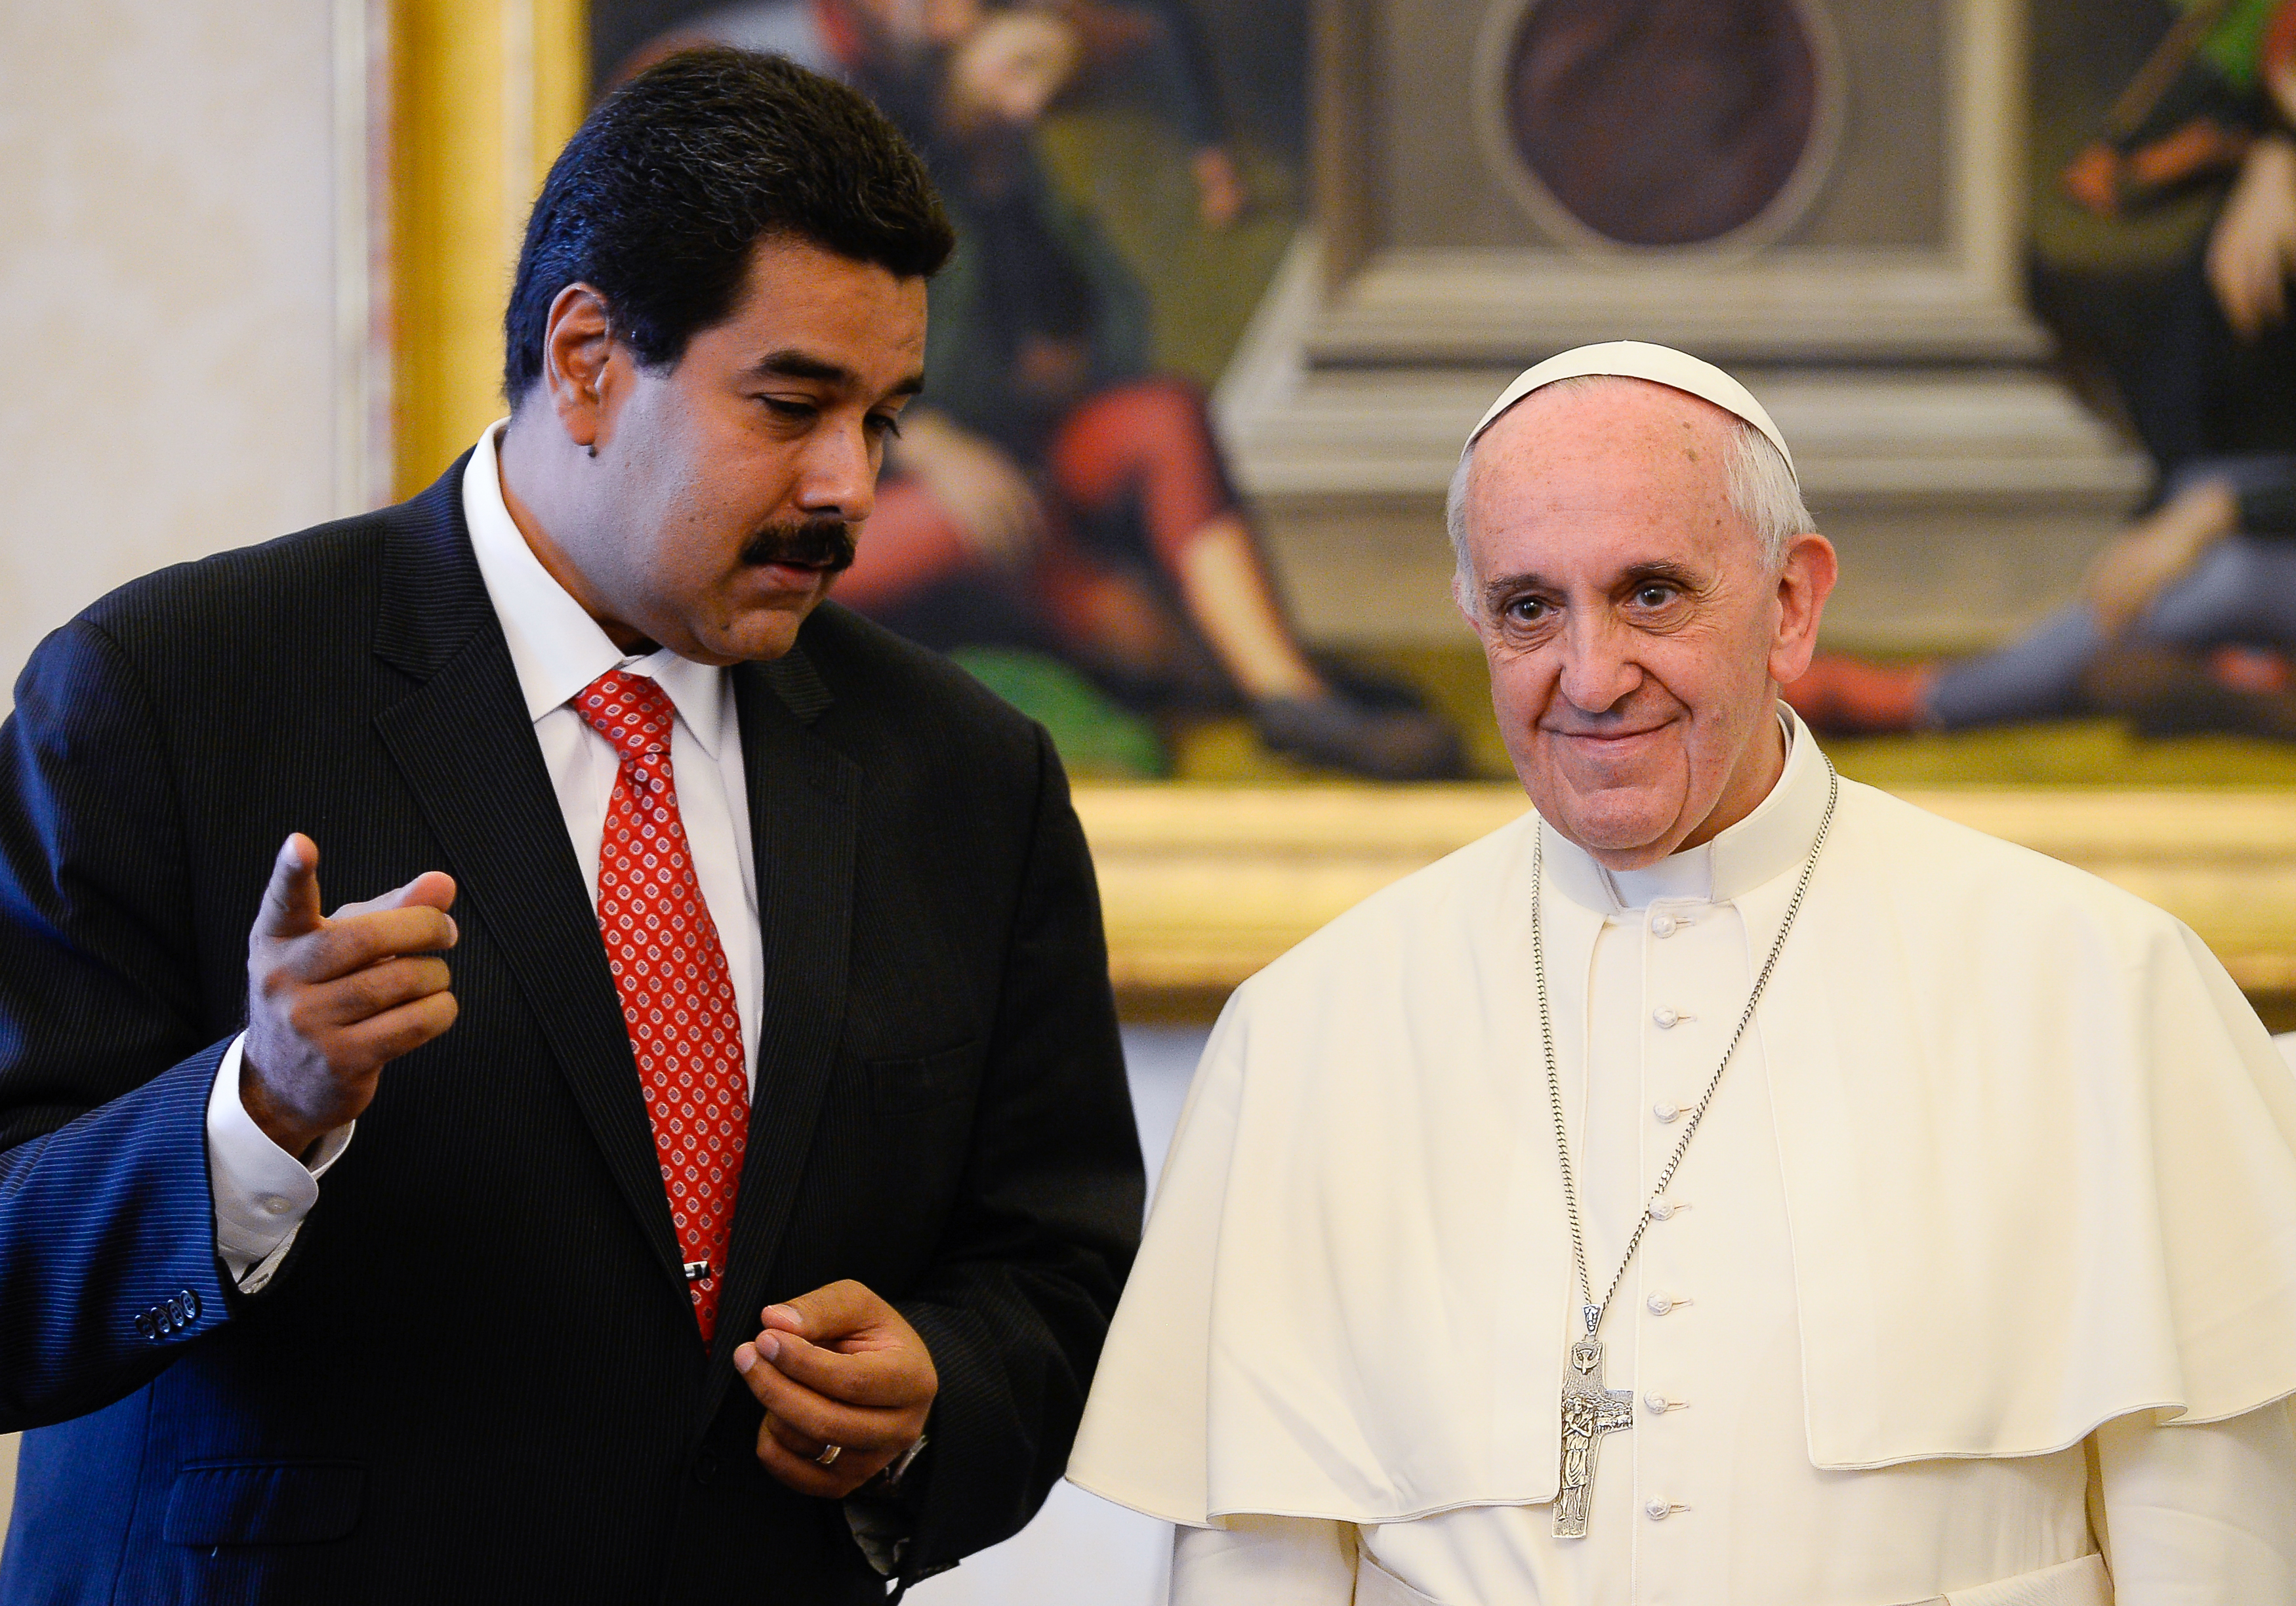 Pope Francis speaks with Venezuelan President Nicol&aacute;s Maduro during a private audience in the pontiff's library on June 17, 2013 at the Vatican. (Andreas Solaro—AFP/Getty Images)